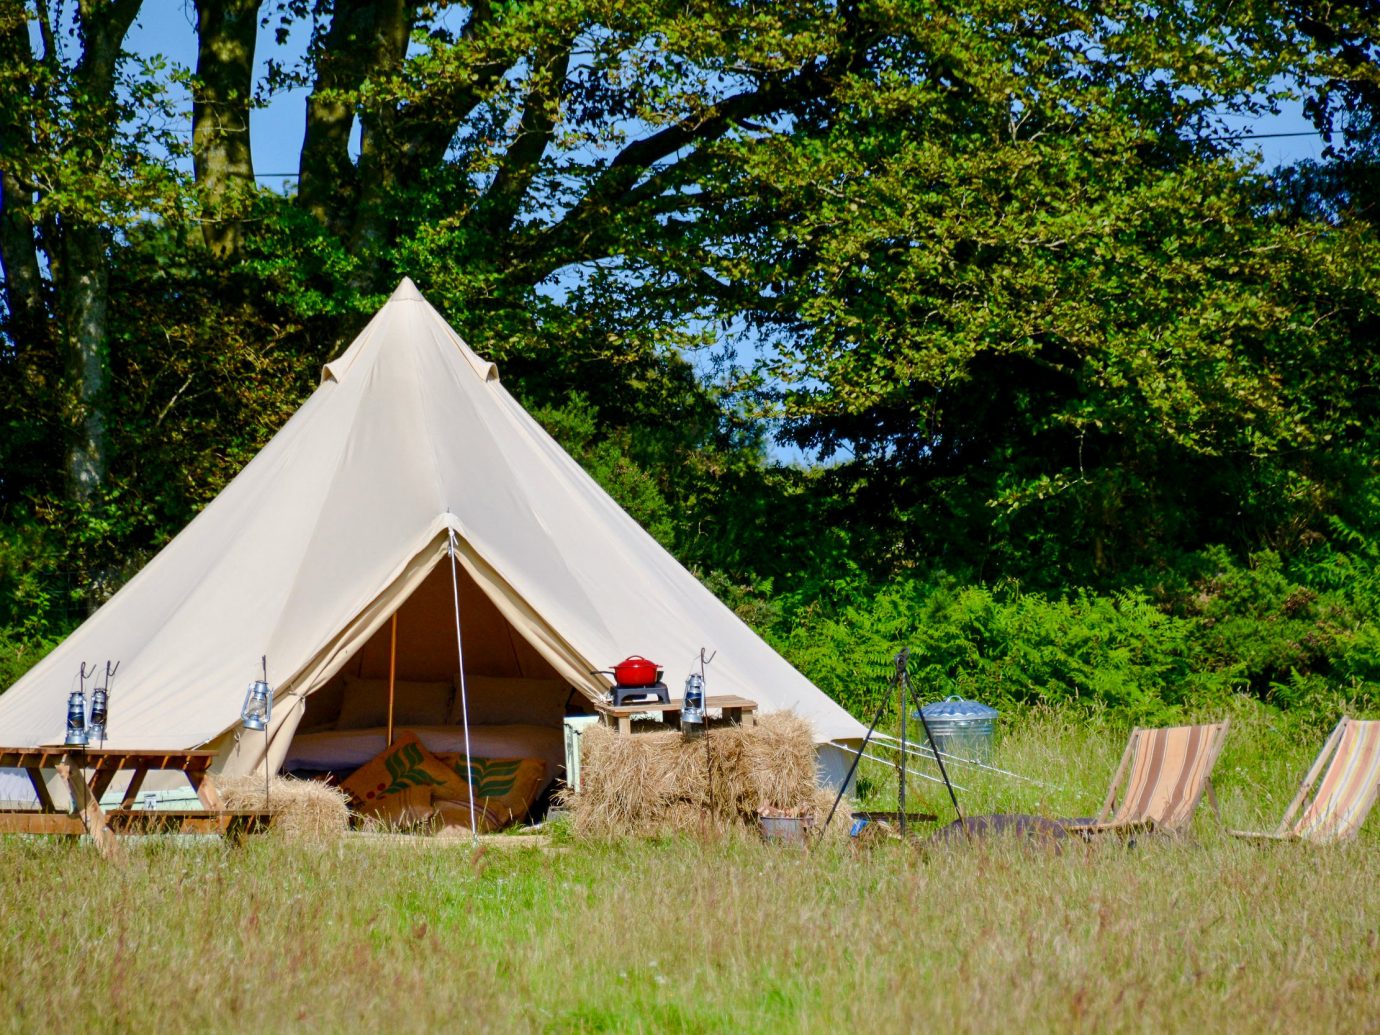 Glamping Outdoors + Adventure Trip Ideas tree grass outdoor tent outdoor object camping hut cottage yurt national park sky landscape recreation lush